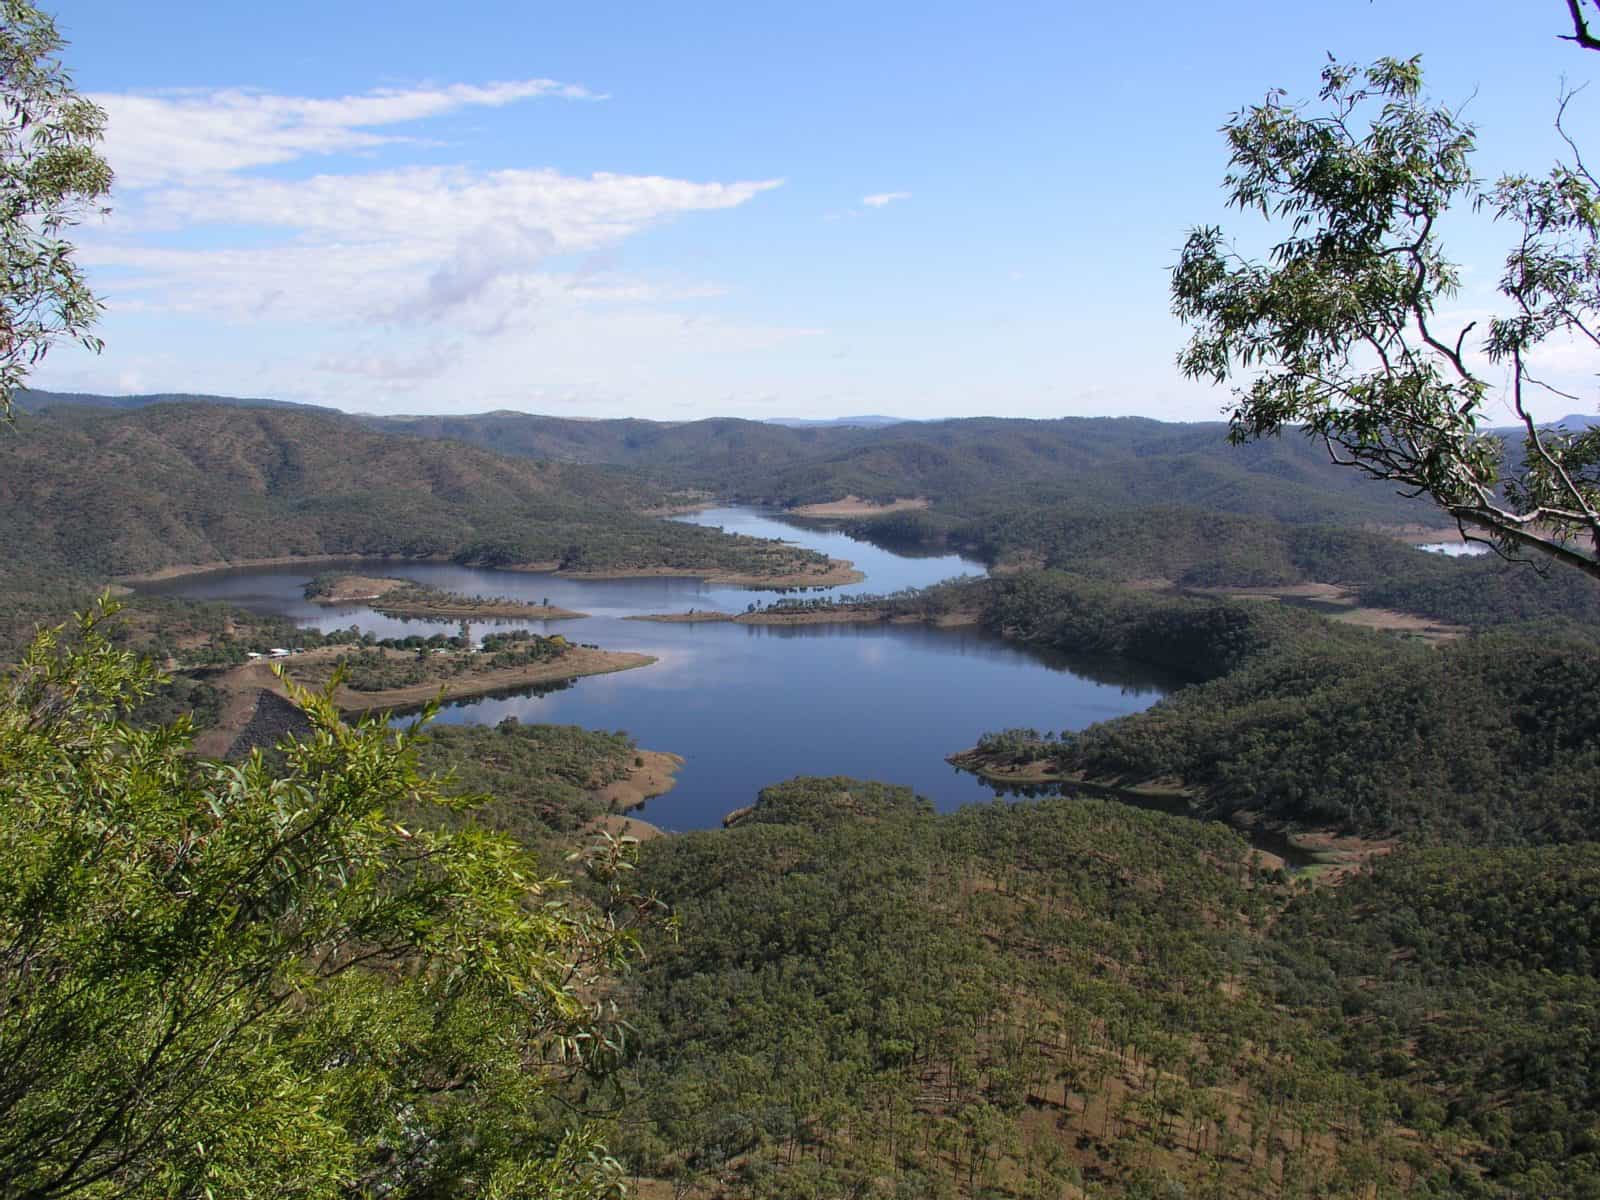 Lake Cania in the Monto District